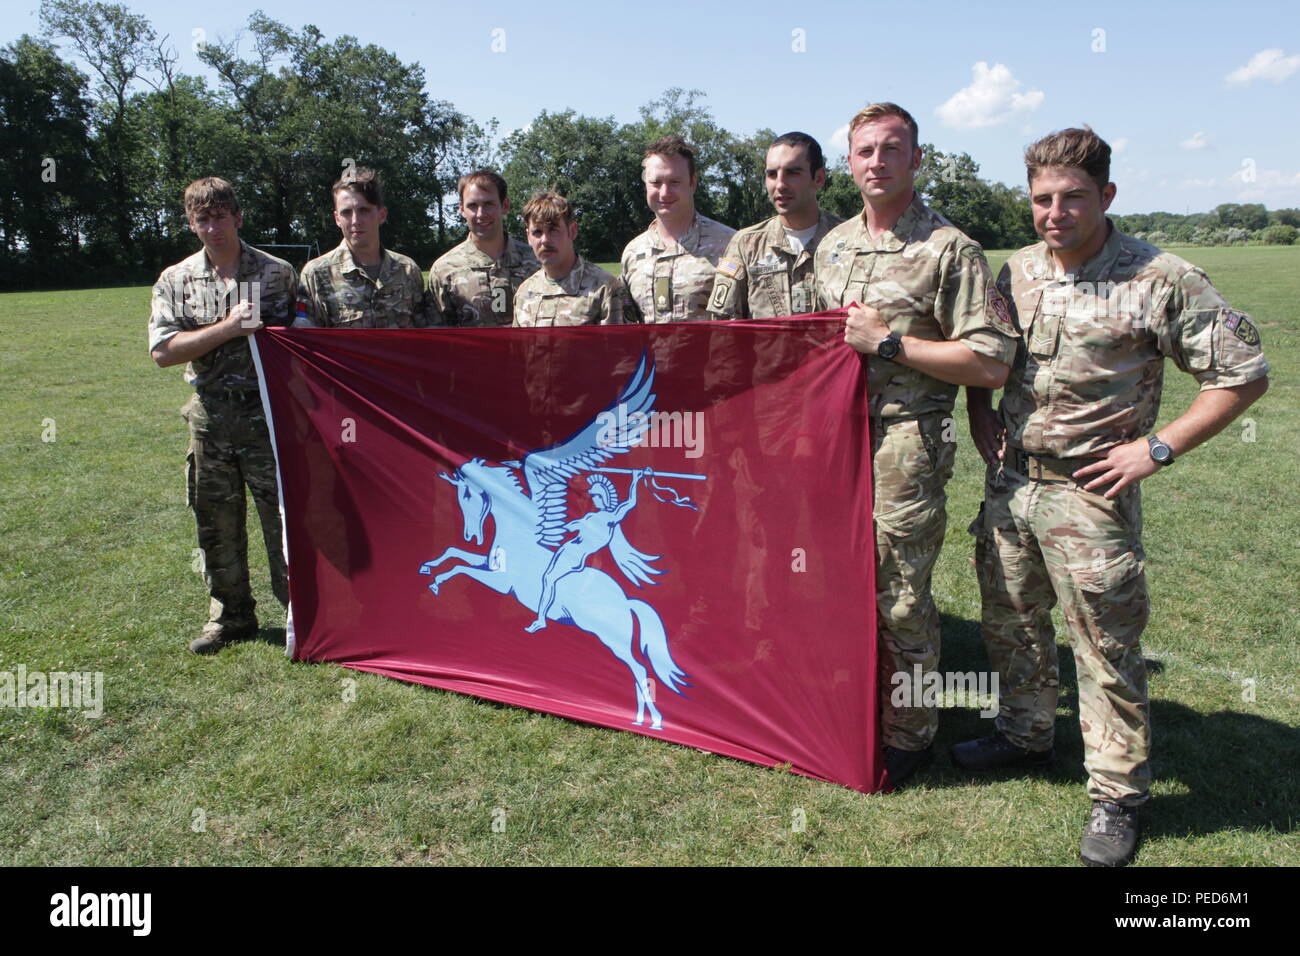 Paratroopers from the 7th PARA, Royal Horse Artillery along with U.S. Army Sgt. Austin Burner display their unit flag at the closing of Leapfest in West Kingston, R.I., Aug. 3, 2015.  Leapfest is an International parachute competition hosted by the 56th Troop Command, Rhode Island National Guard to promote high level technical training and esprit de corps within the International Airborne community. (U.S. Army Photo by Sgt. 1st Class Horace Murray/Released) Stock Photo